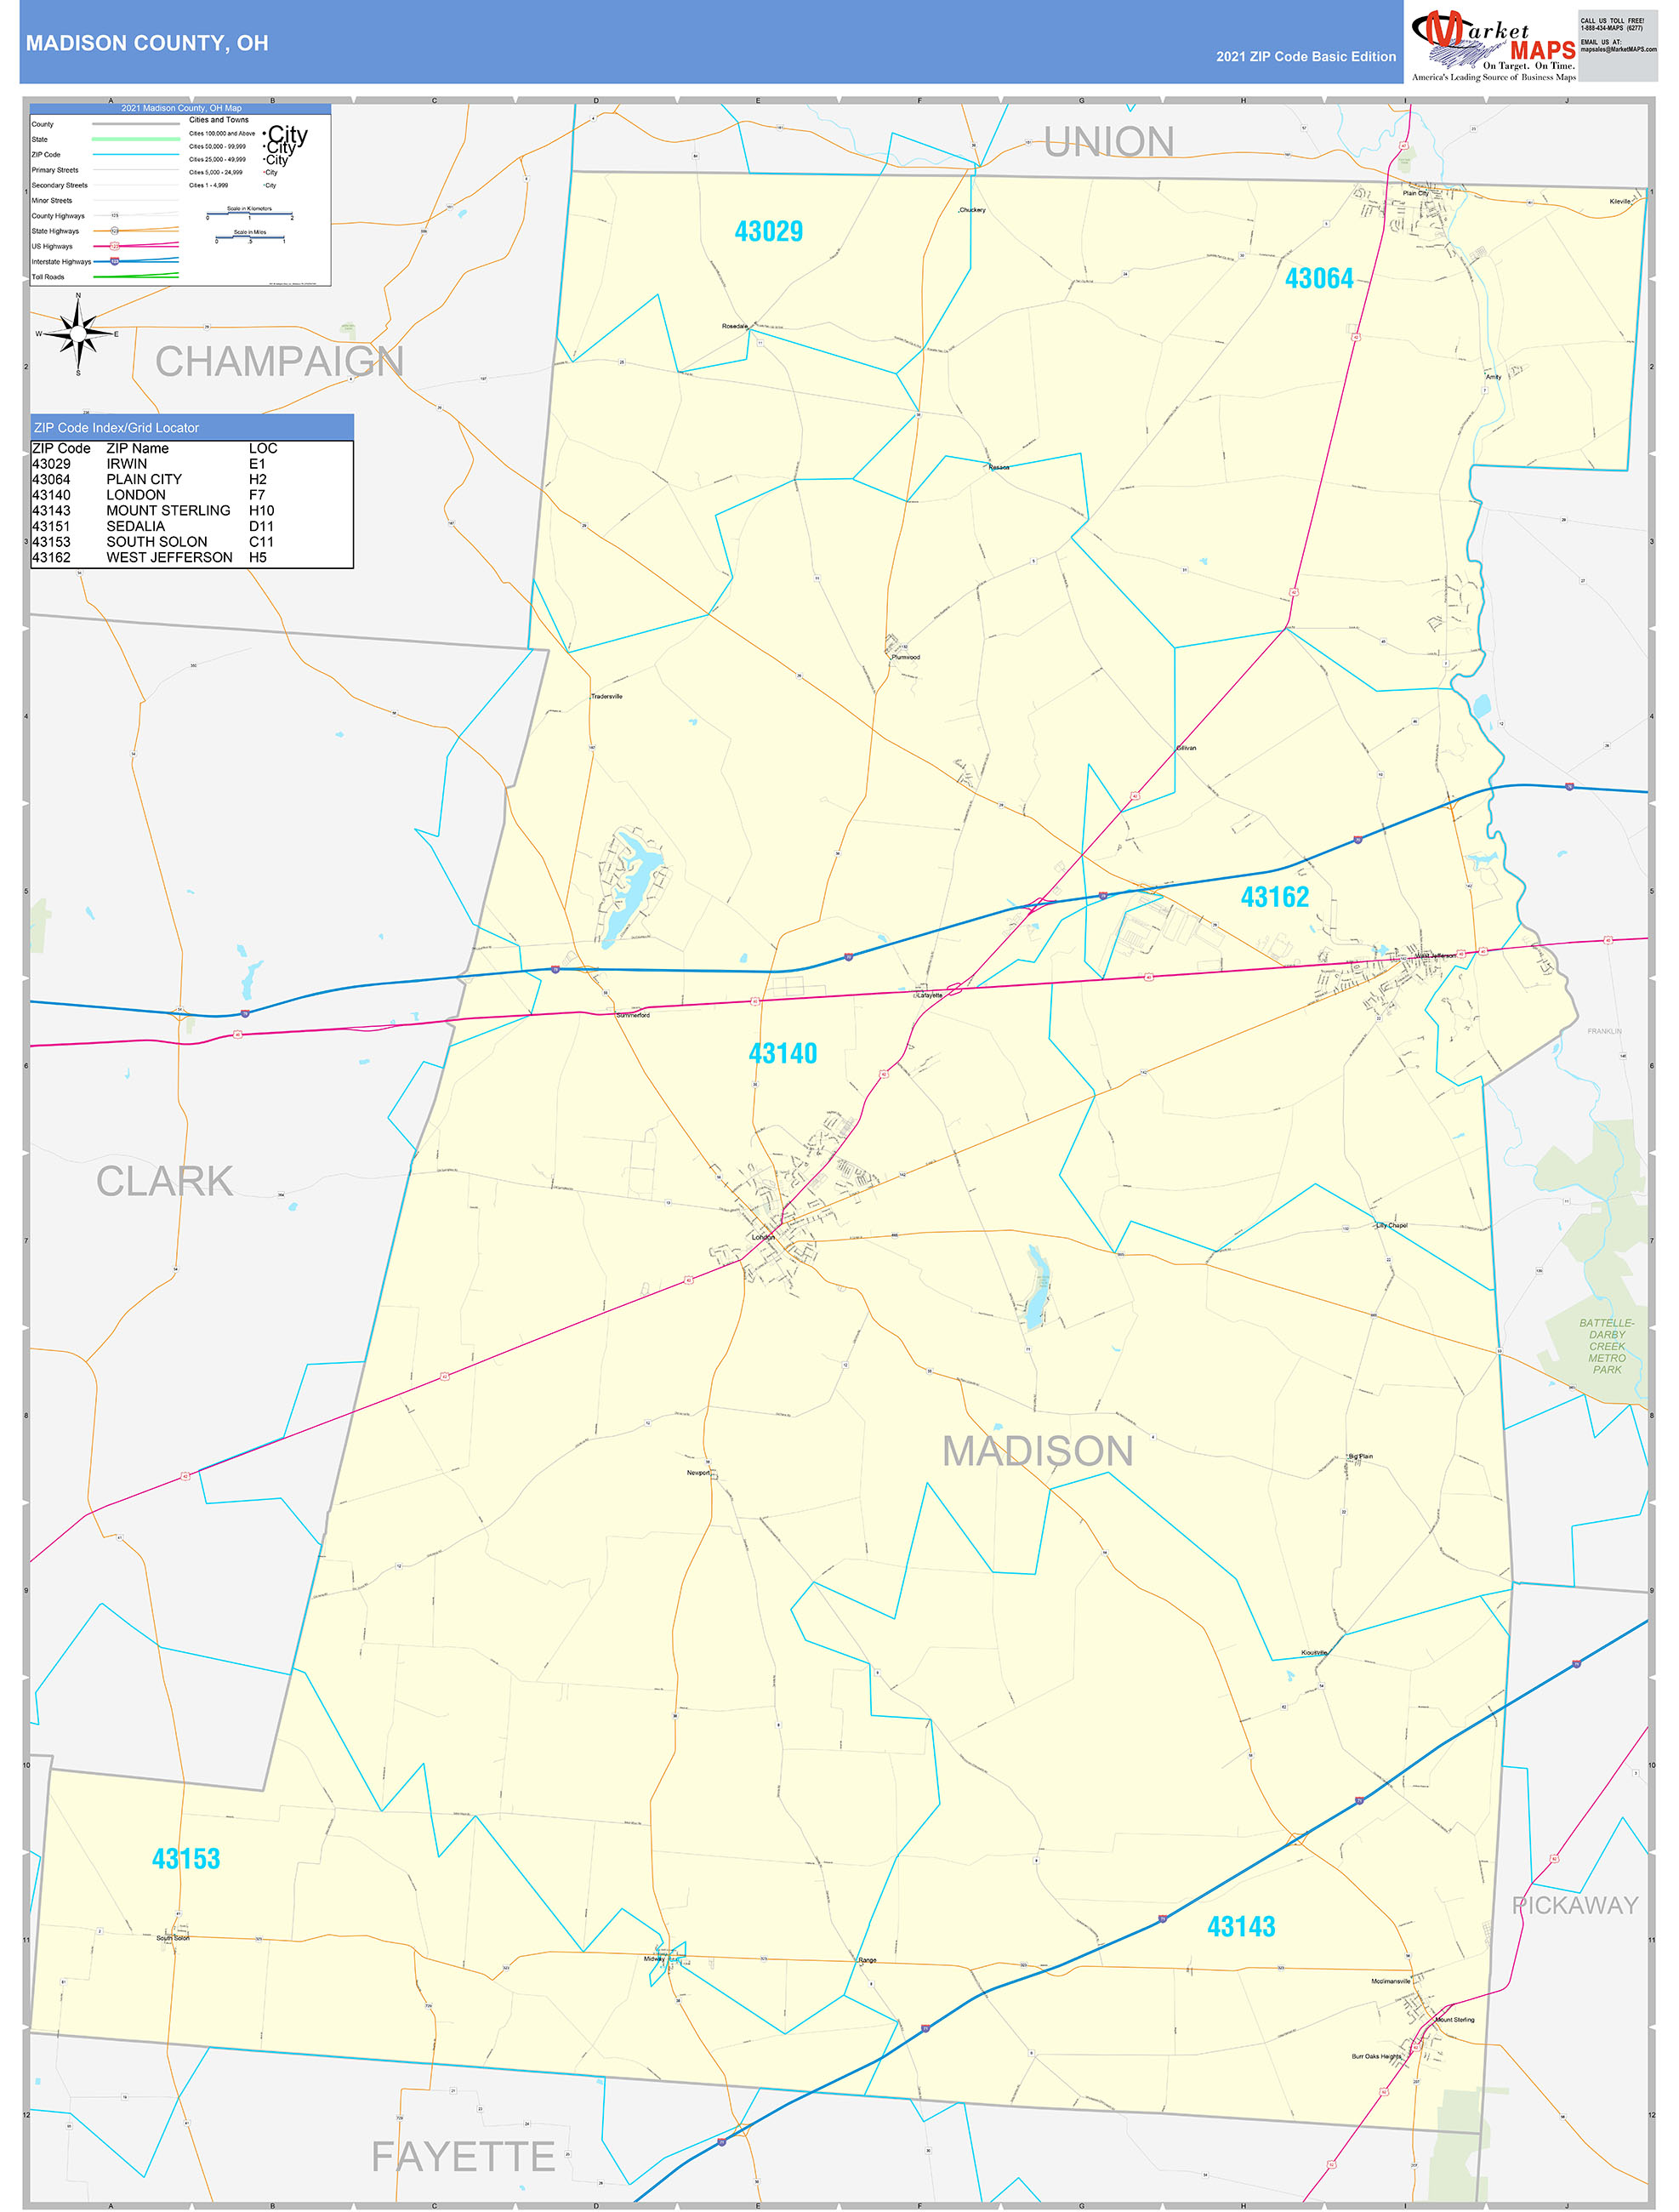 Madison County, OH Zip Code Wall Map Basic Style by MarketMAPS